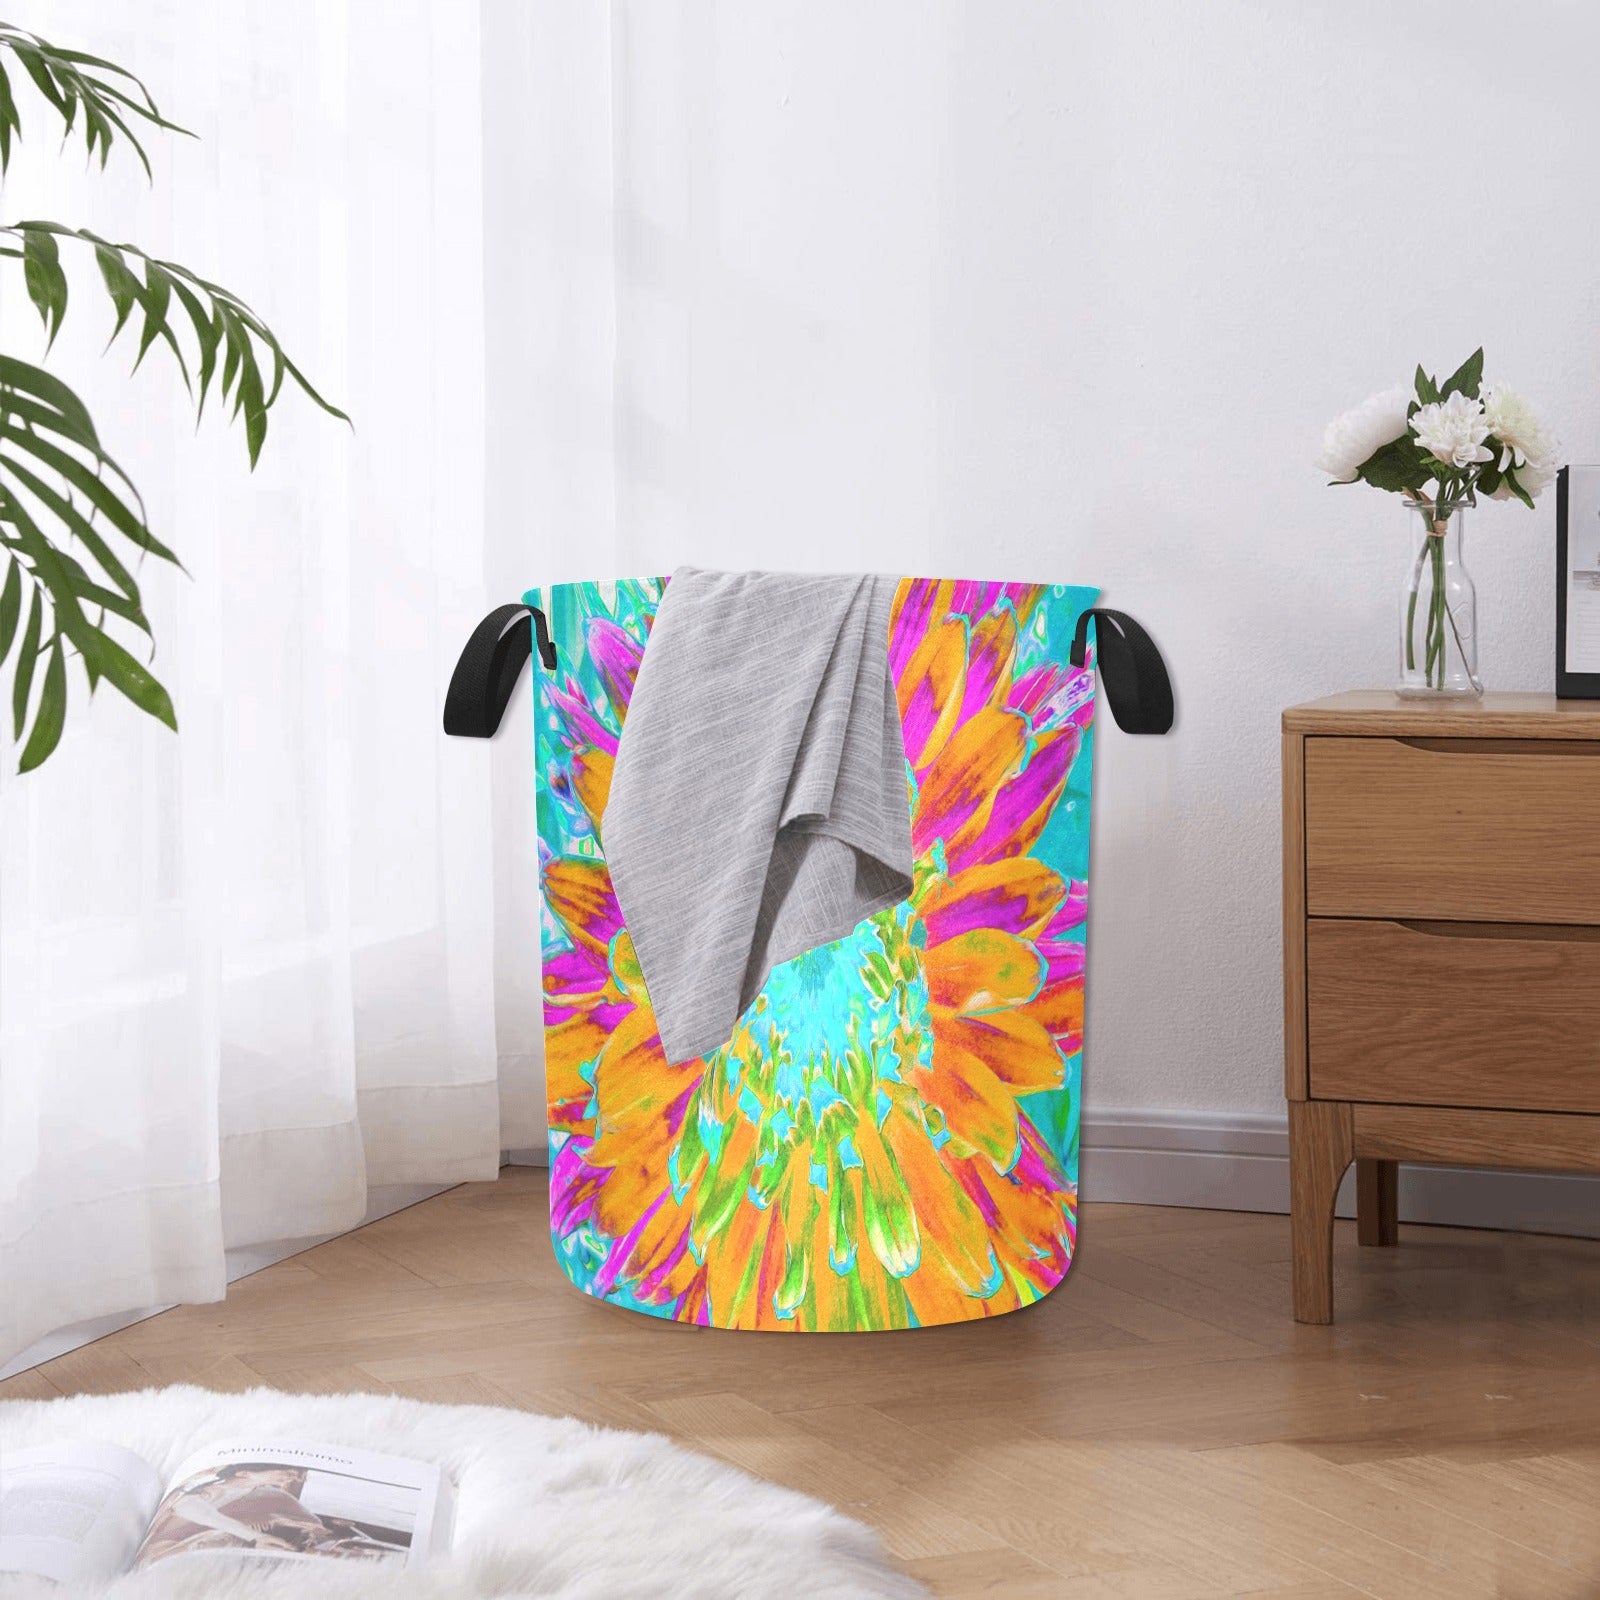 Fabric Laundry Basket with Handles, Tropical Orange and Hot Pink Decorative Dahlia